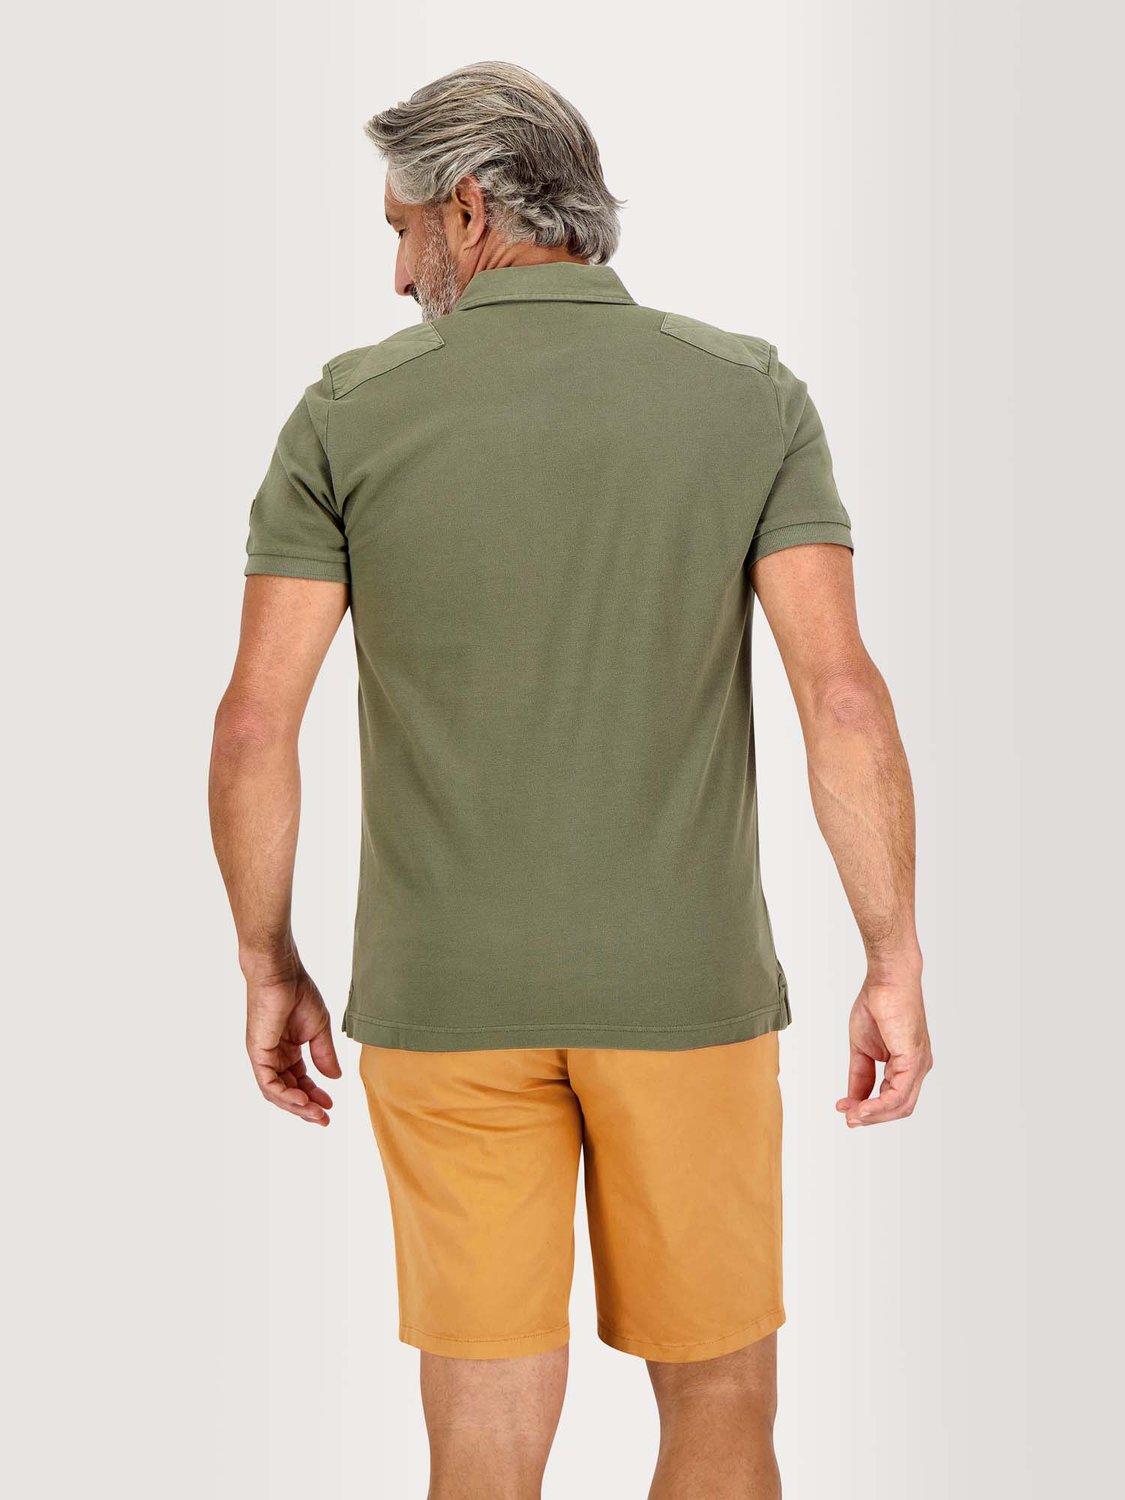 Polo Homme Manches Courtes Beige